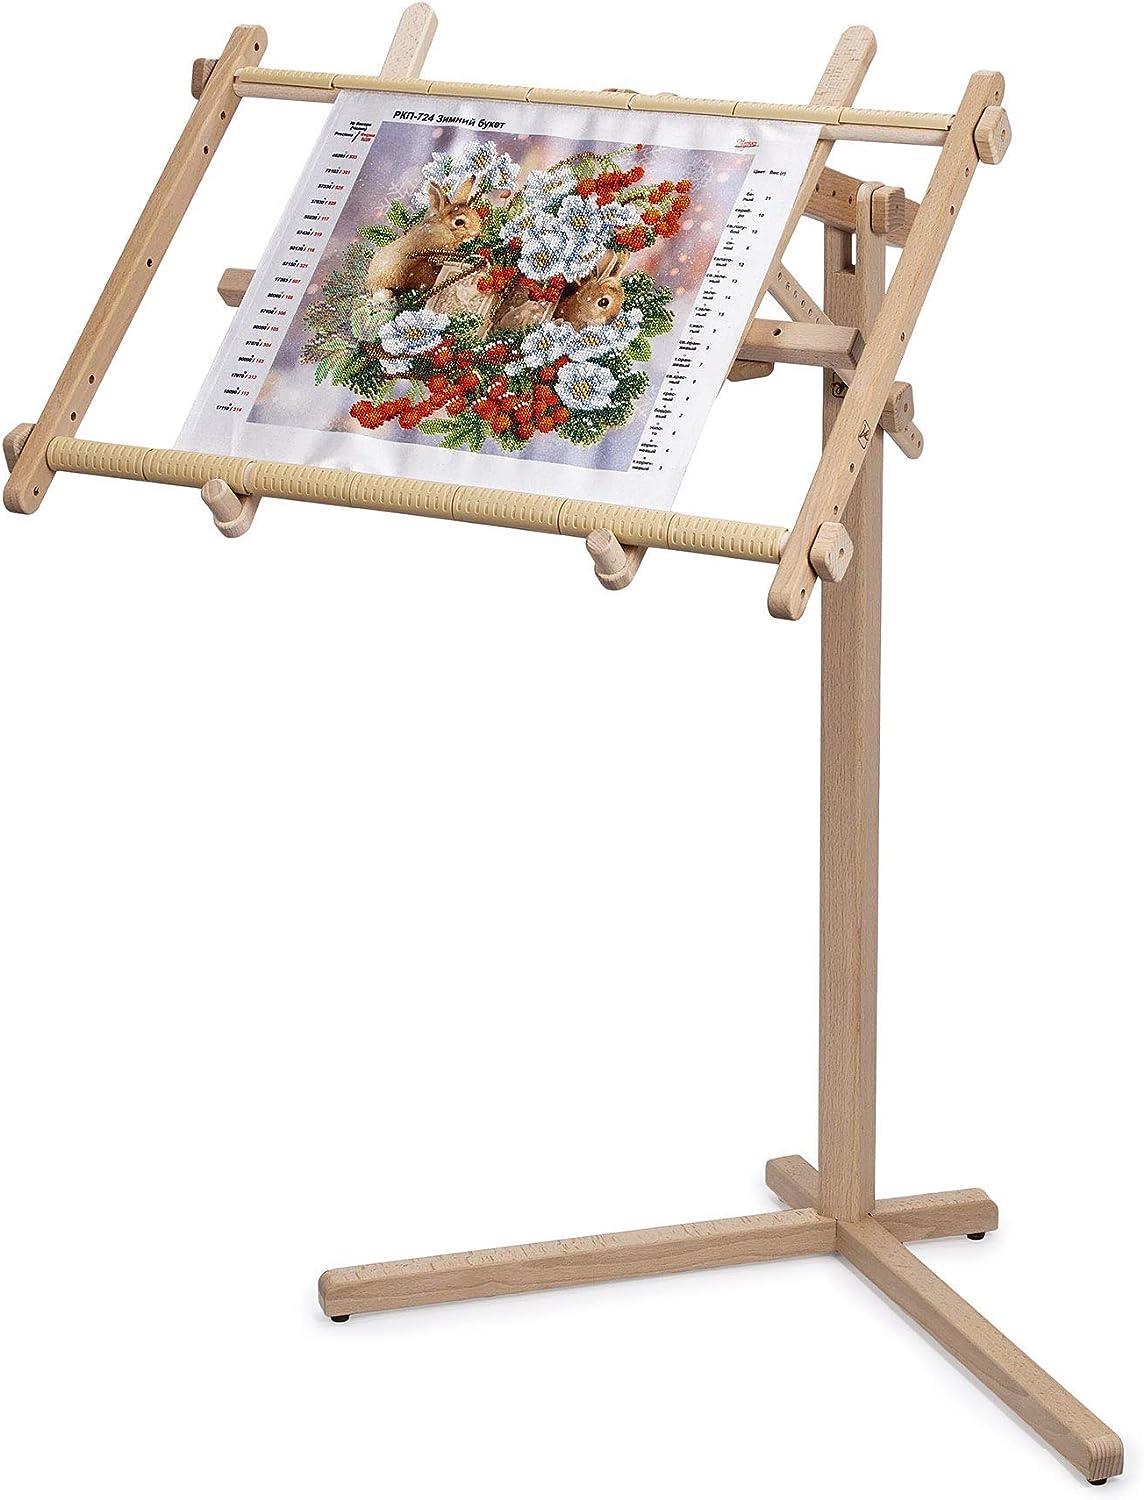 AllAboutEmbroideryUA Needlepoint Embroidery Tapestry Scroll Frame Made of Organic Beech, Wooden Cross Stitch Frame, Needlepoint Holder, Stitching Fram